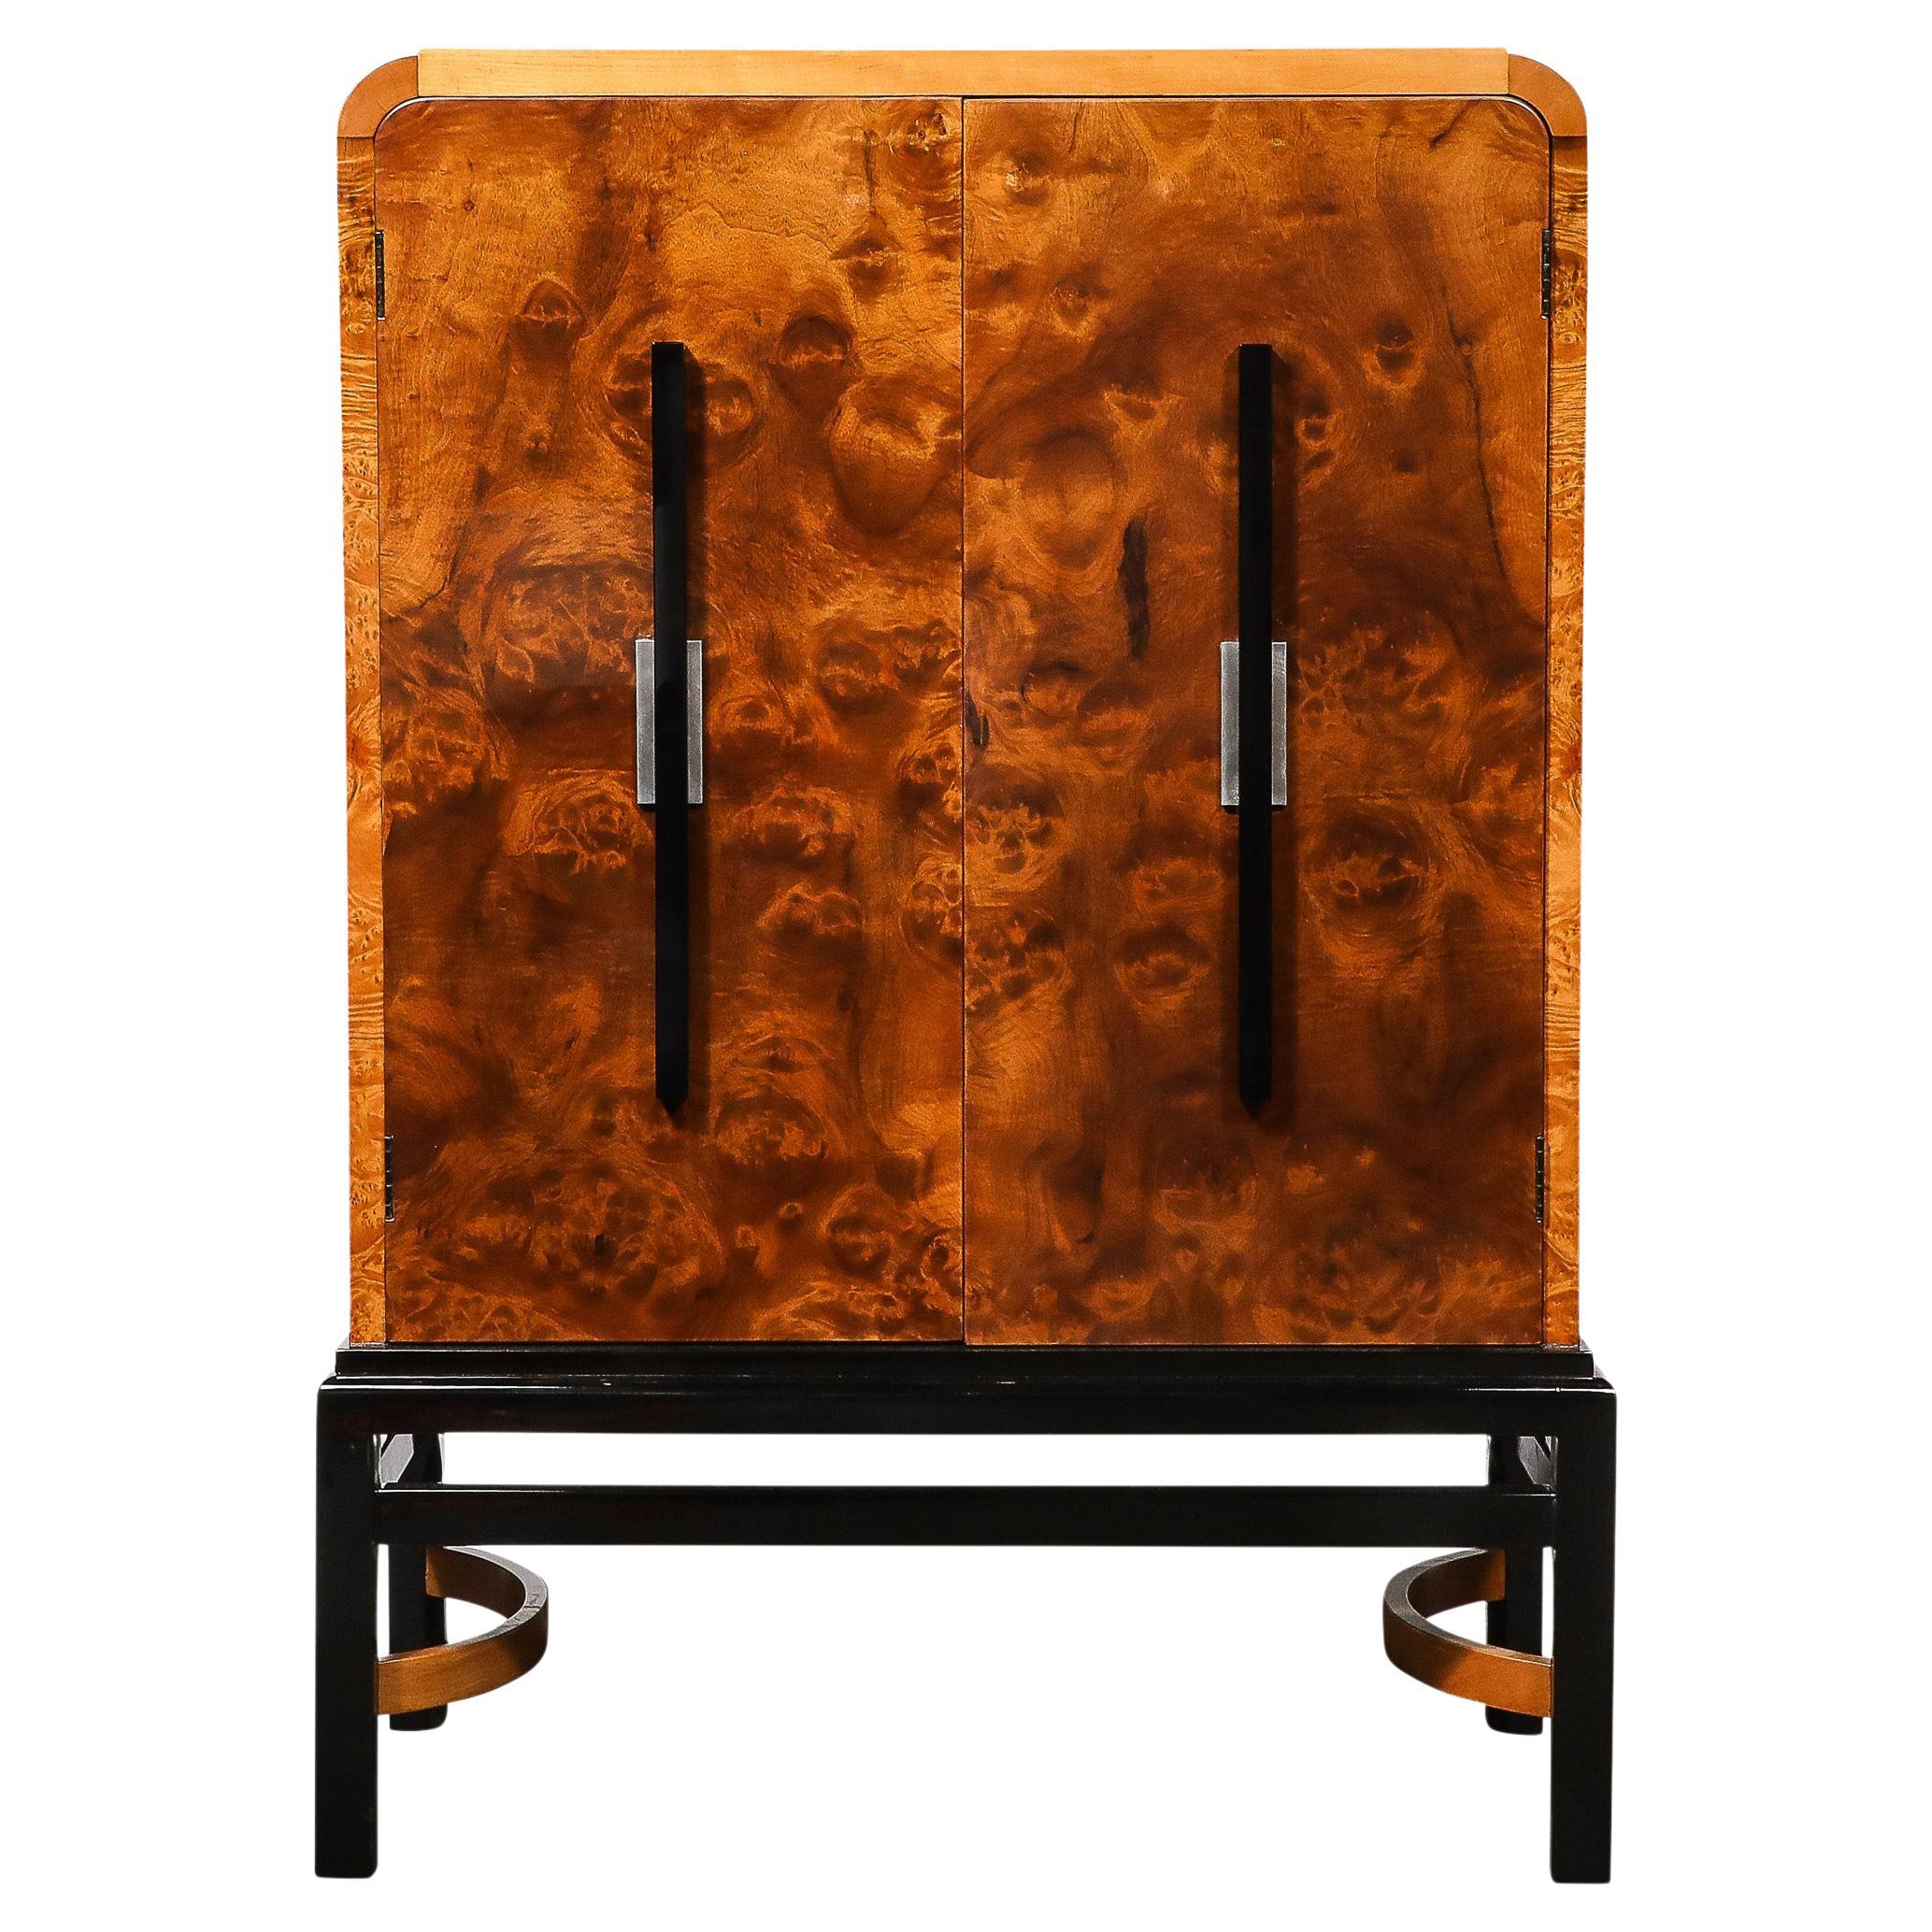 Art Deco Burled Walnut Bar Cabinet by Donald Deskey for the Hastings Company